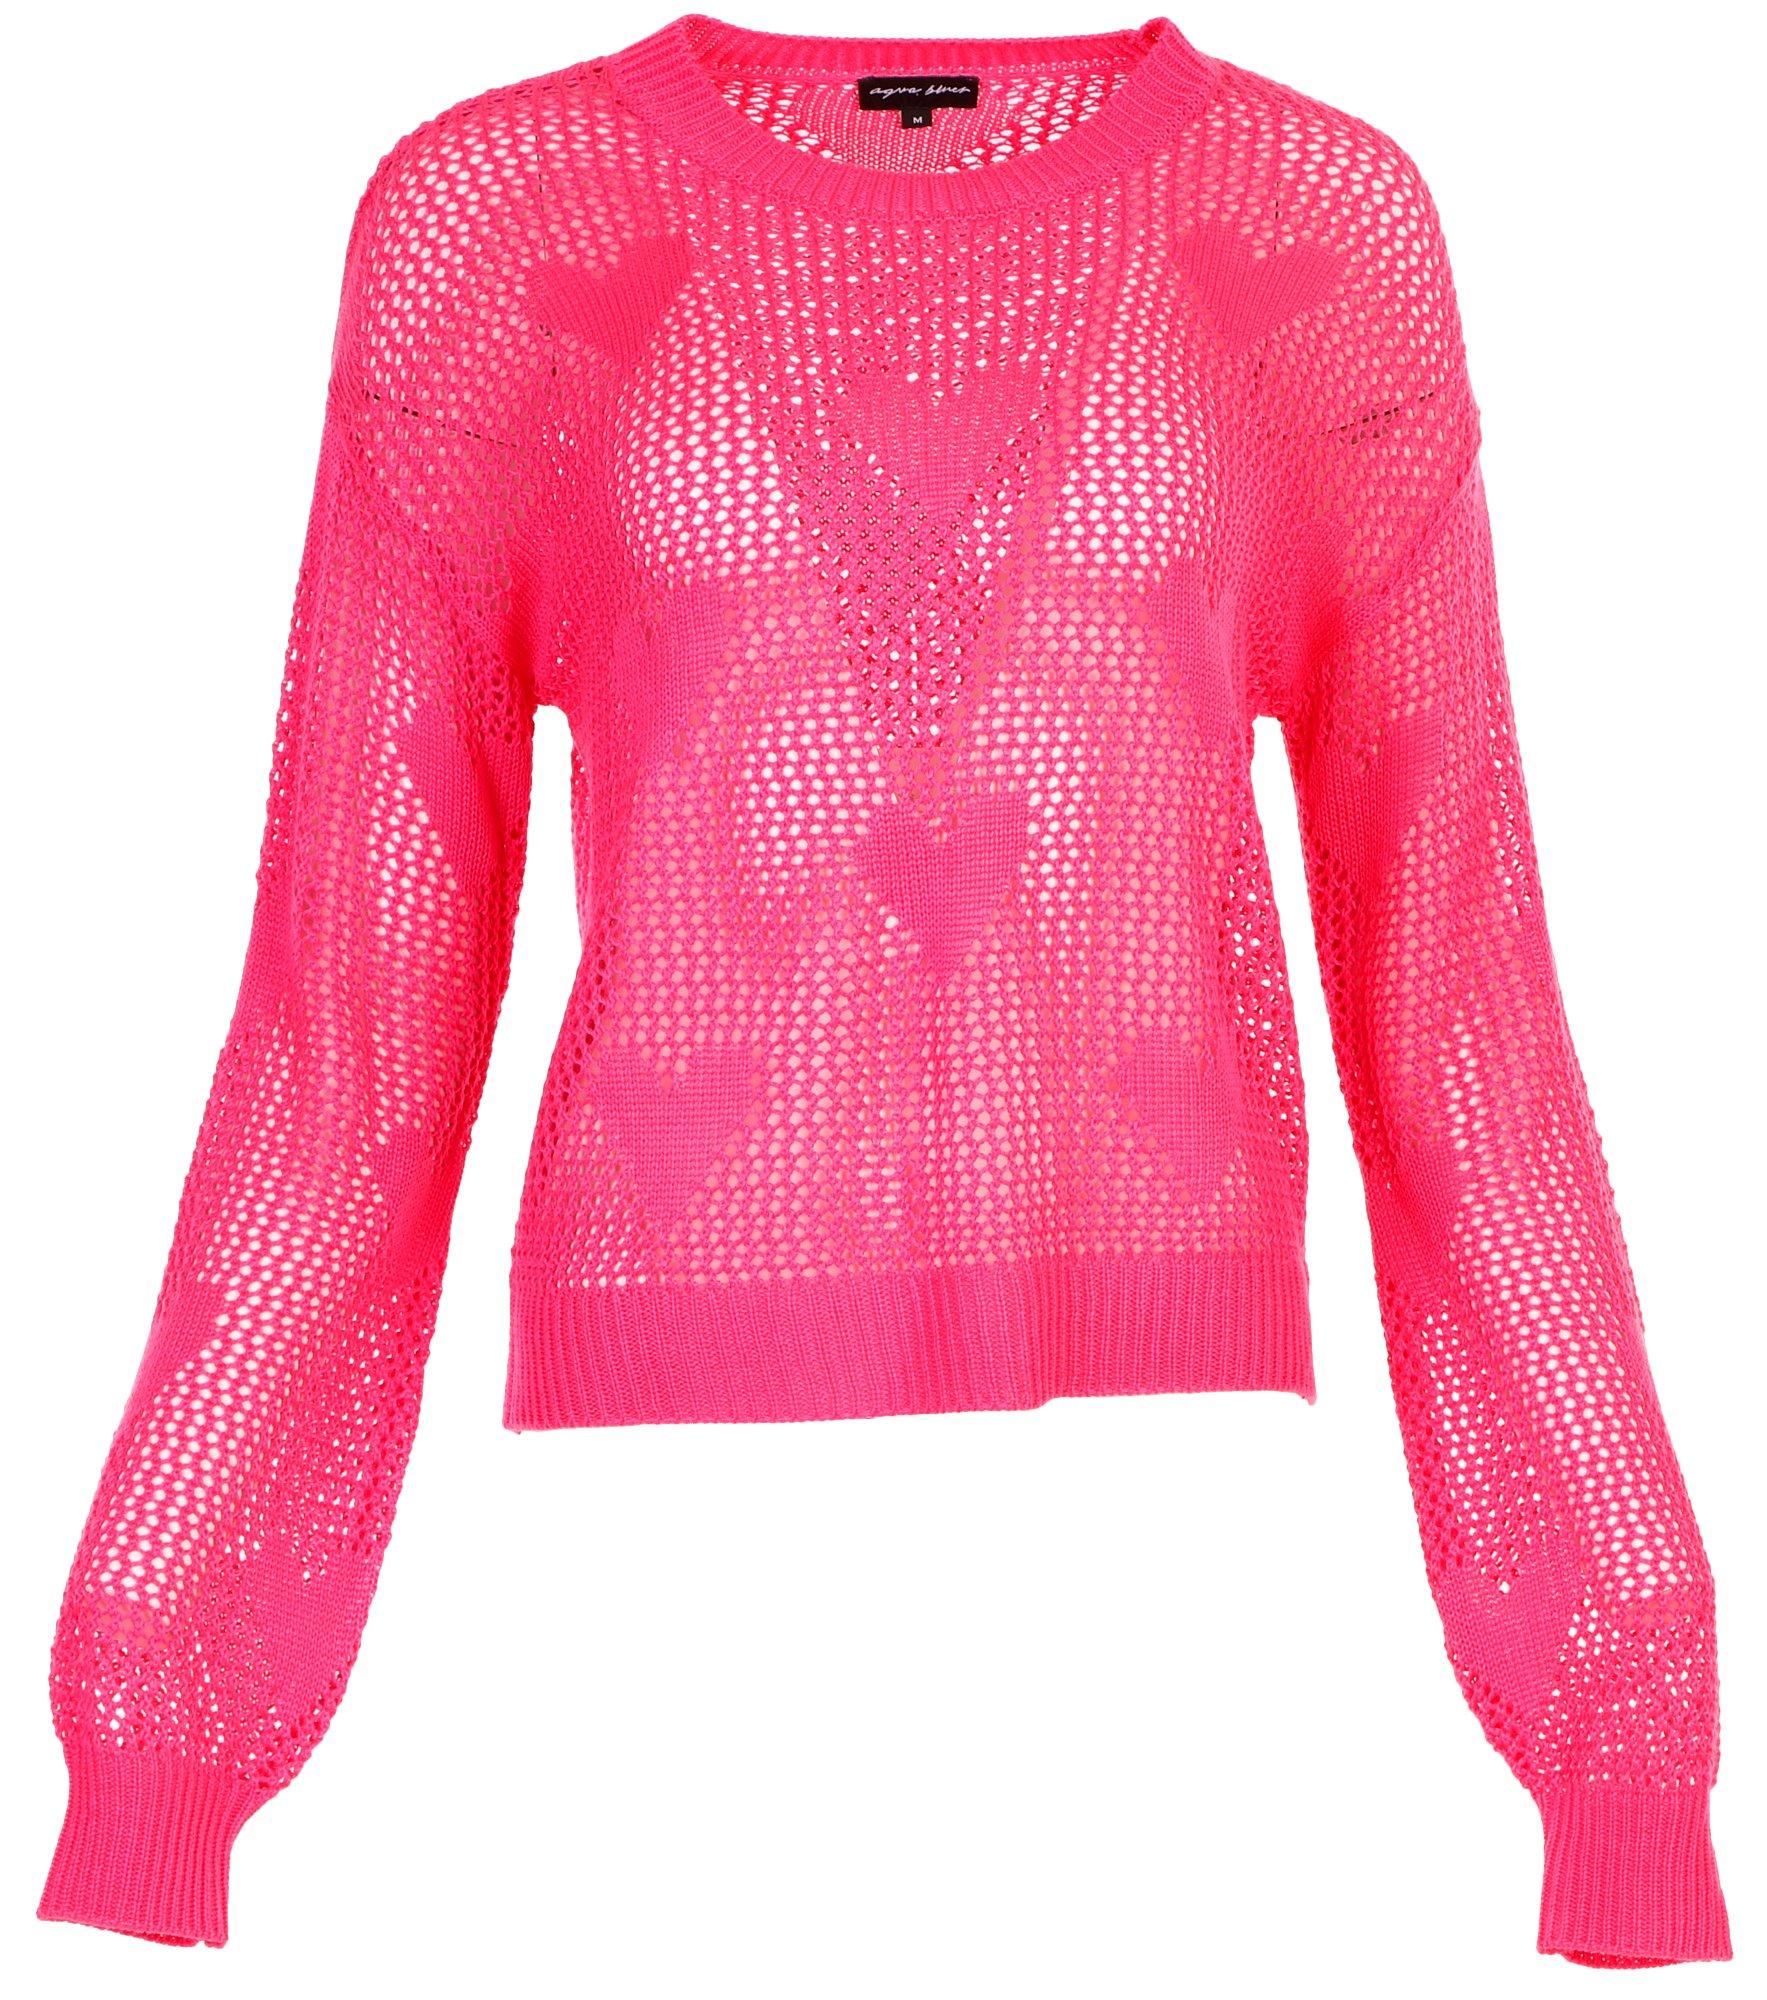 Juniors Knit Valentine's Day Long Sleeve Top